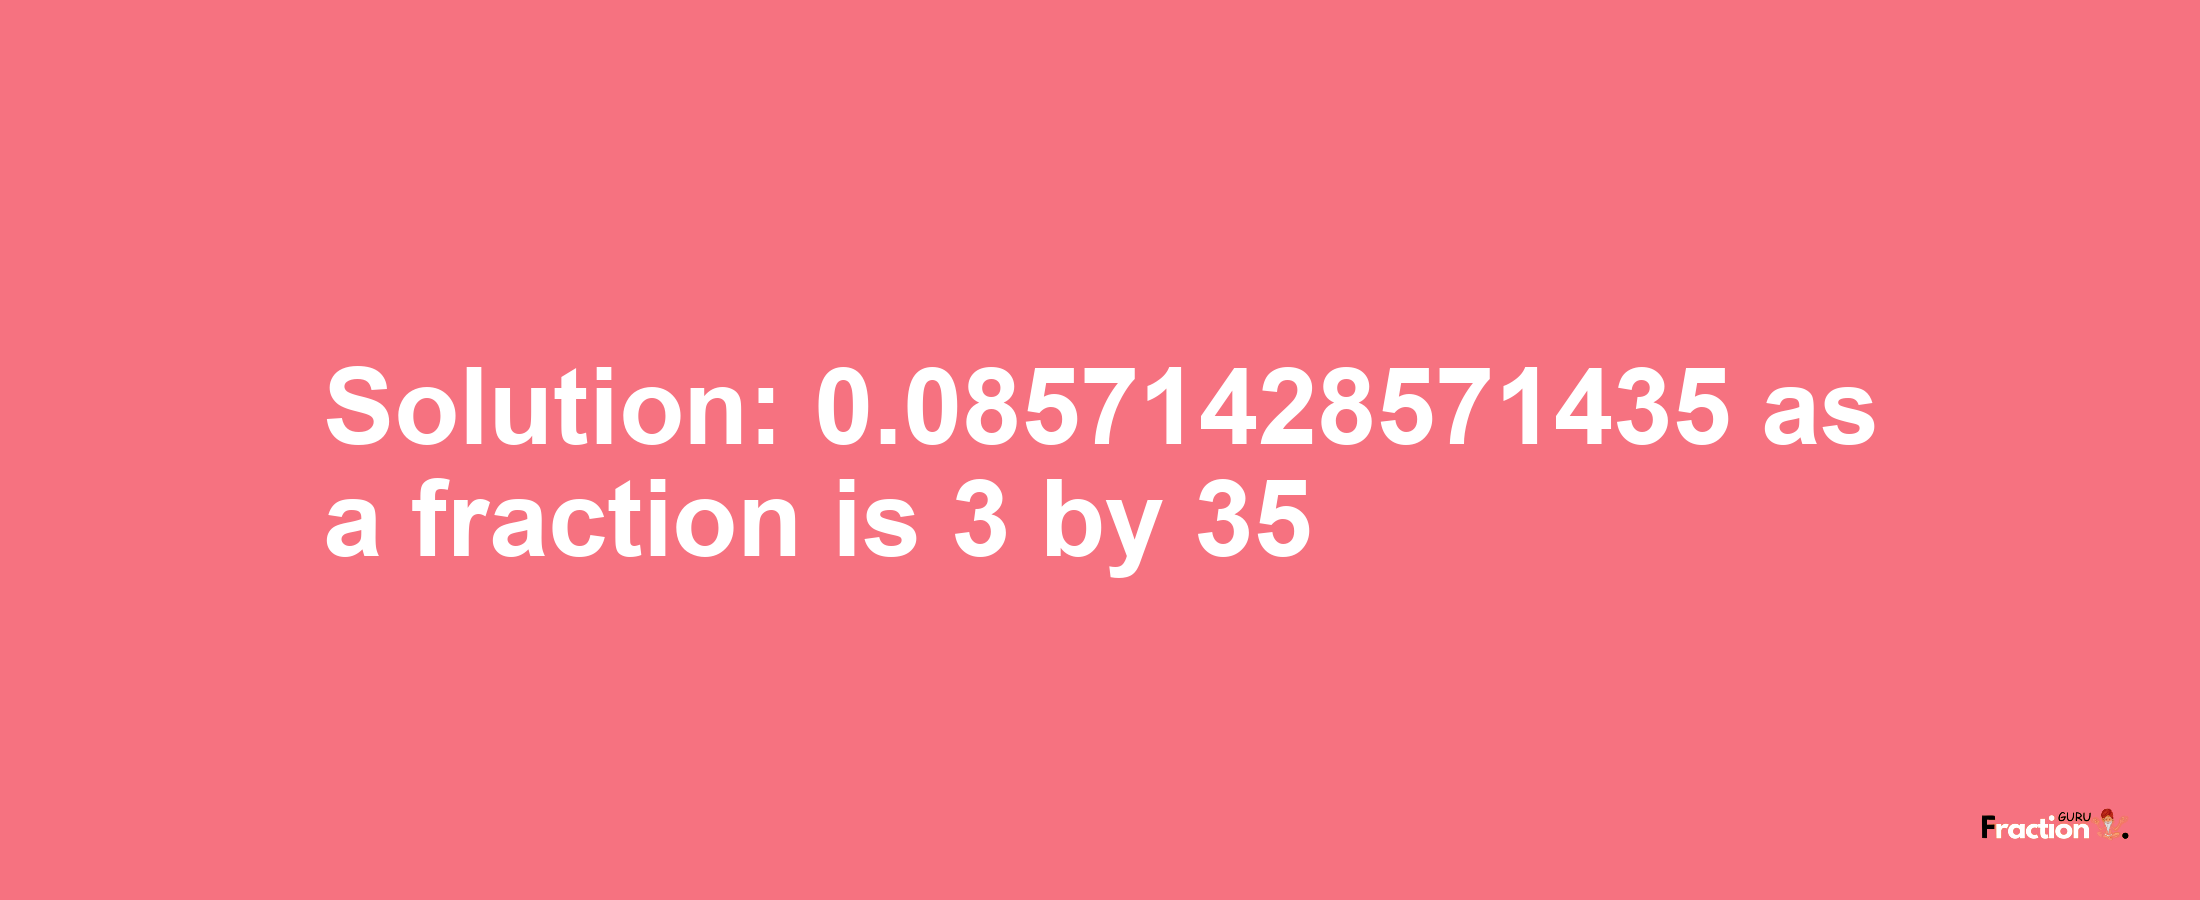 Solution:0.08571428571435 as a fraction is 3/35